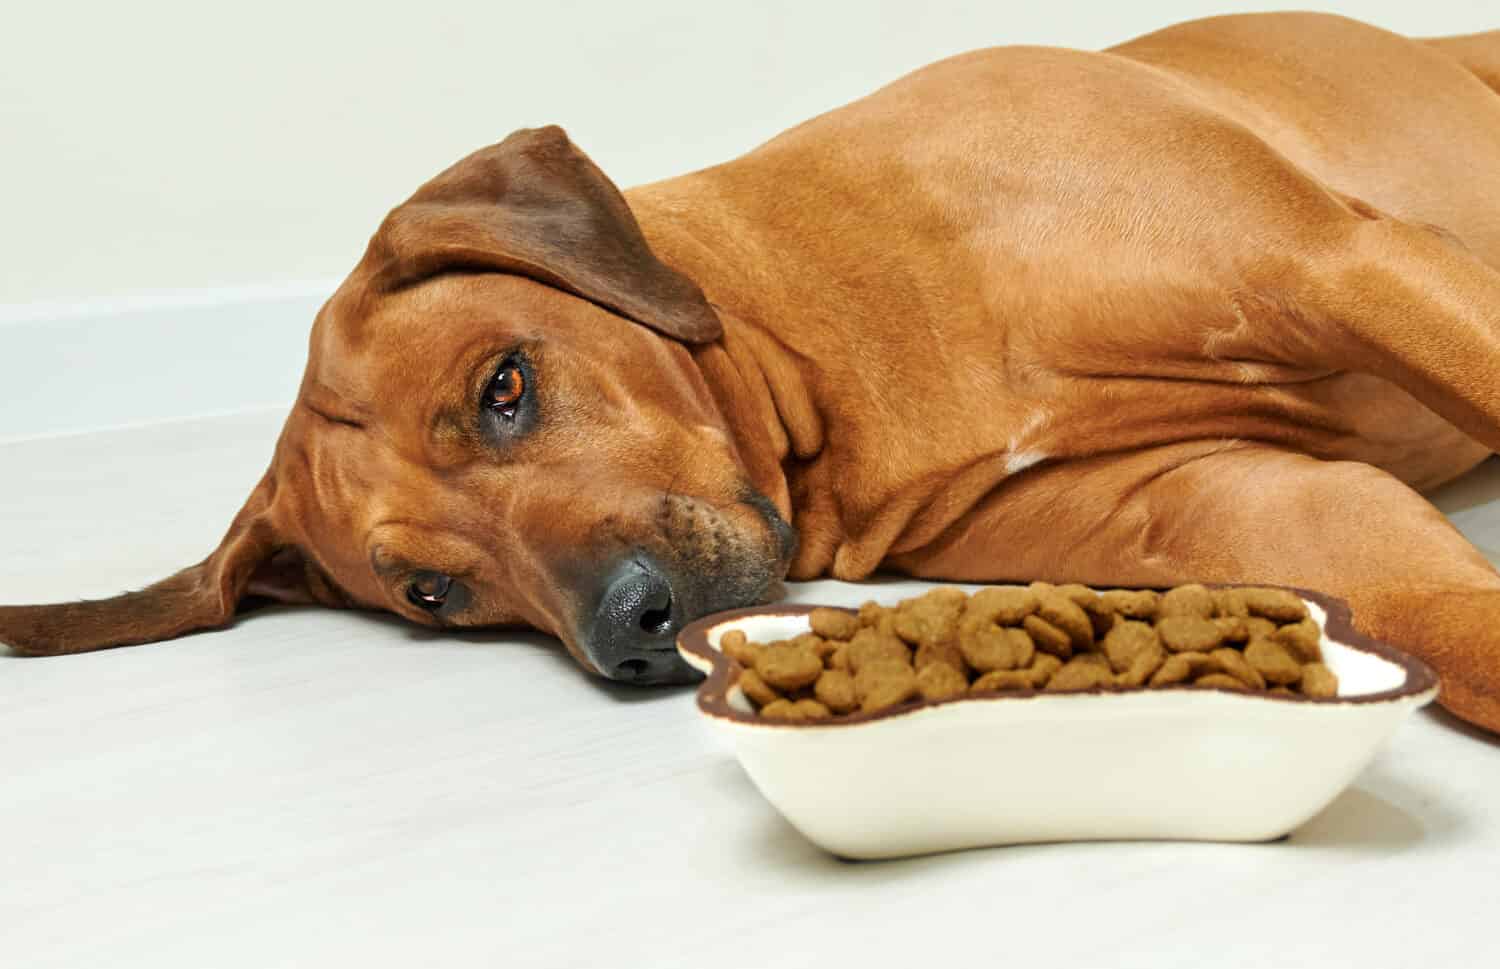 A canine battling with acid reflux, exemplifying the discomfort and irritation caused by this common digestive condition in dogs.